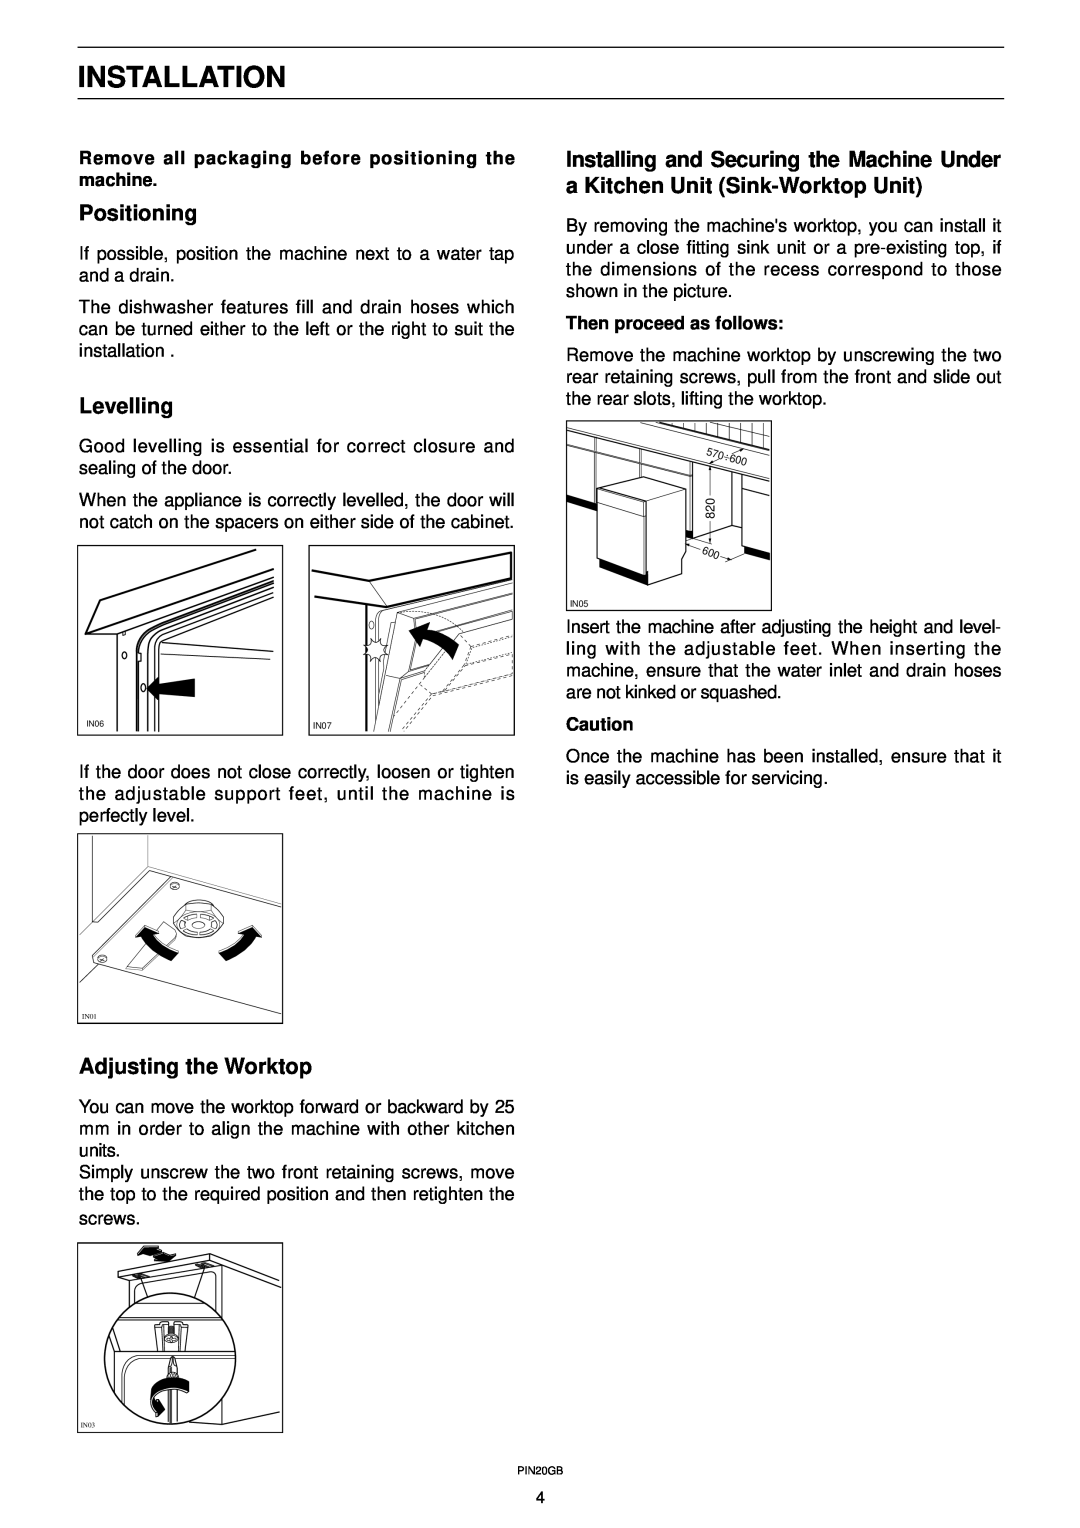 Zanussi DW 911 manual Installation, Positioning, Levelling, Adjusting the Worktop 